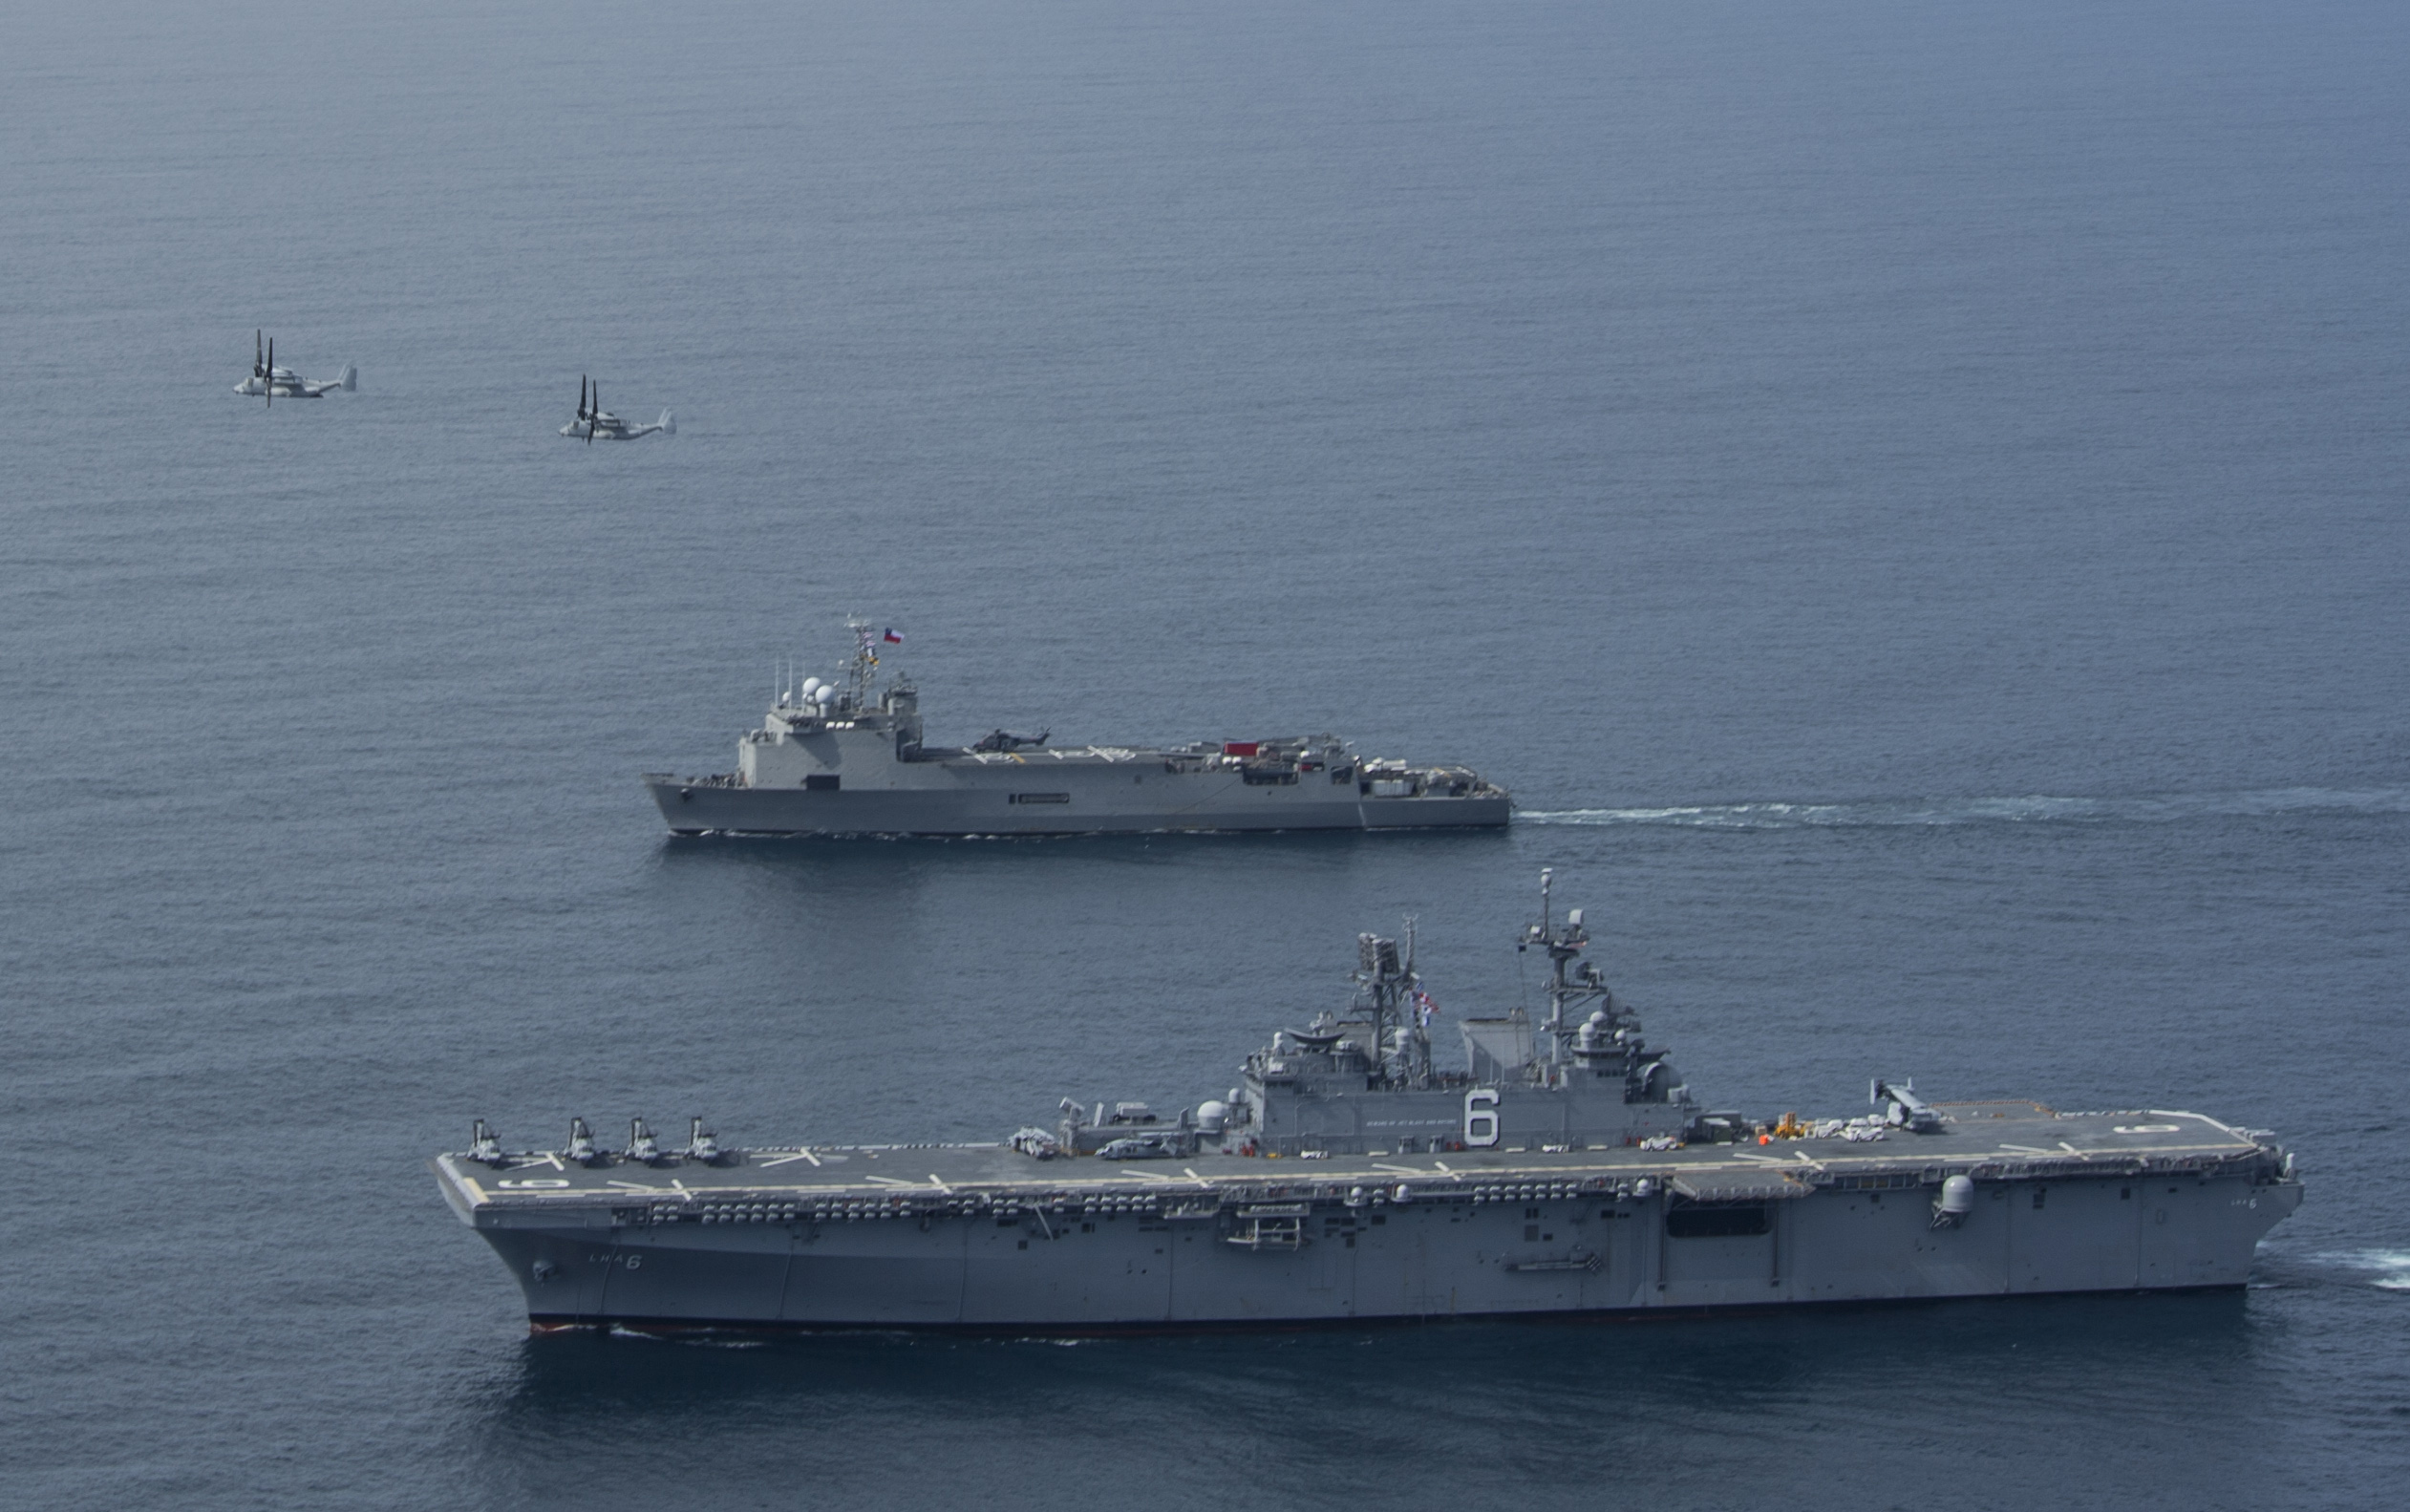 USS_America_(LHA-6)_and_Sargento_Aldea_(LSDH-91)_underway_off_Chile_in_August_2014.JPG